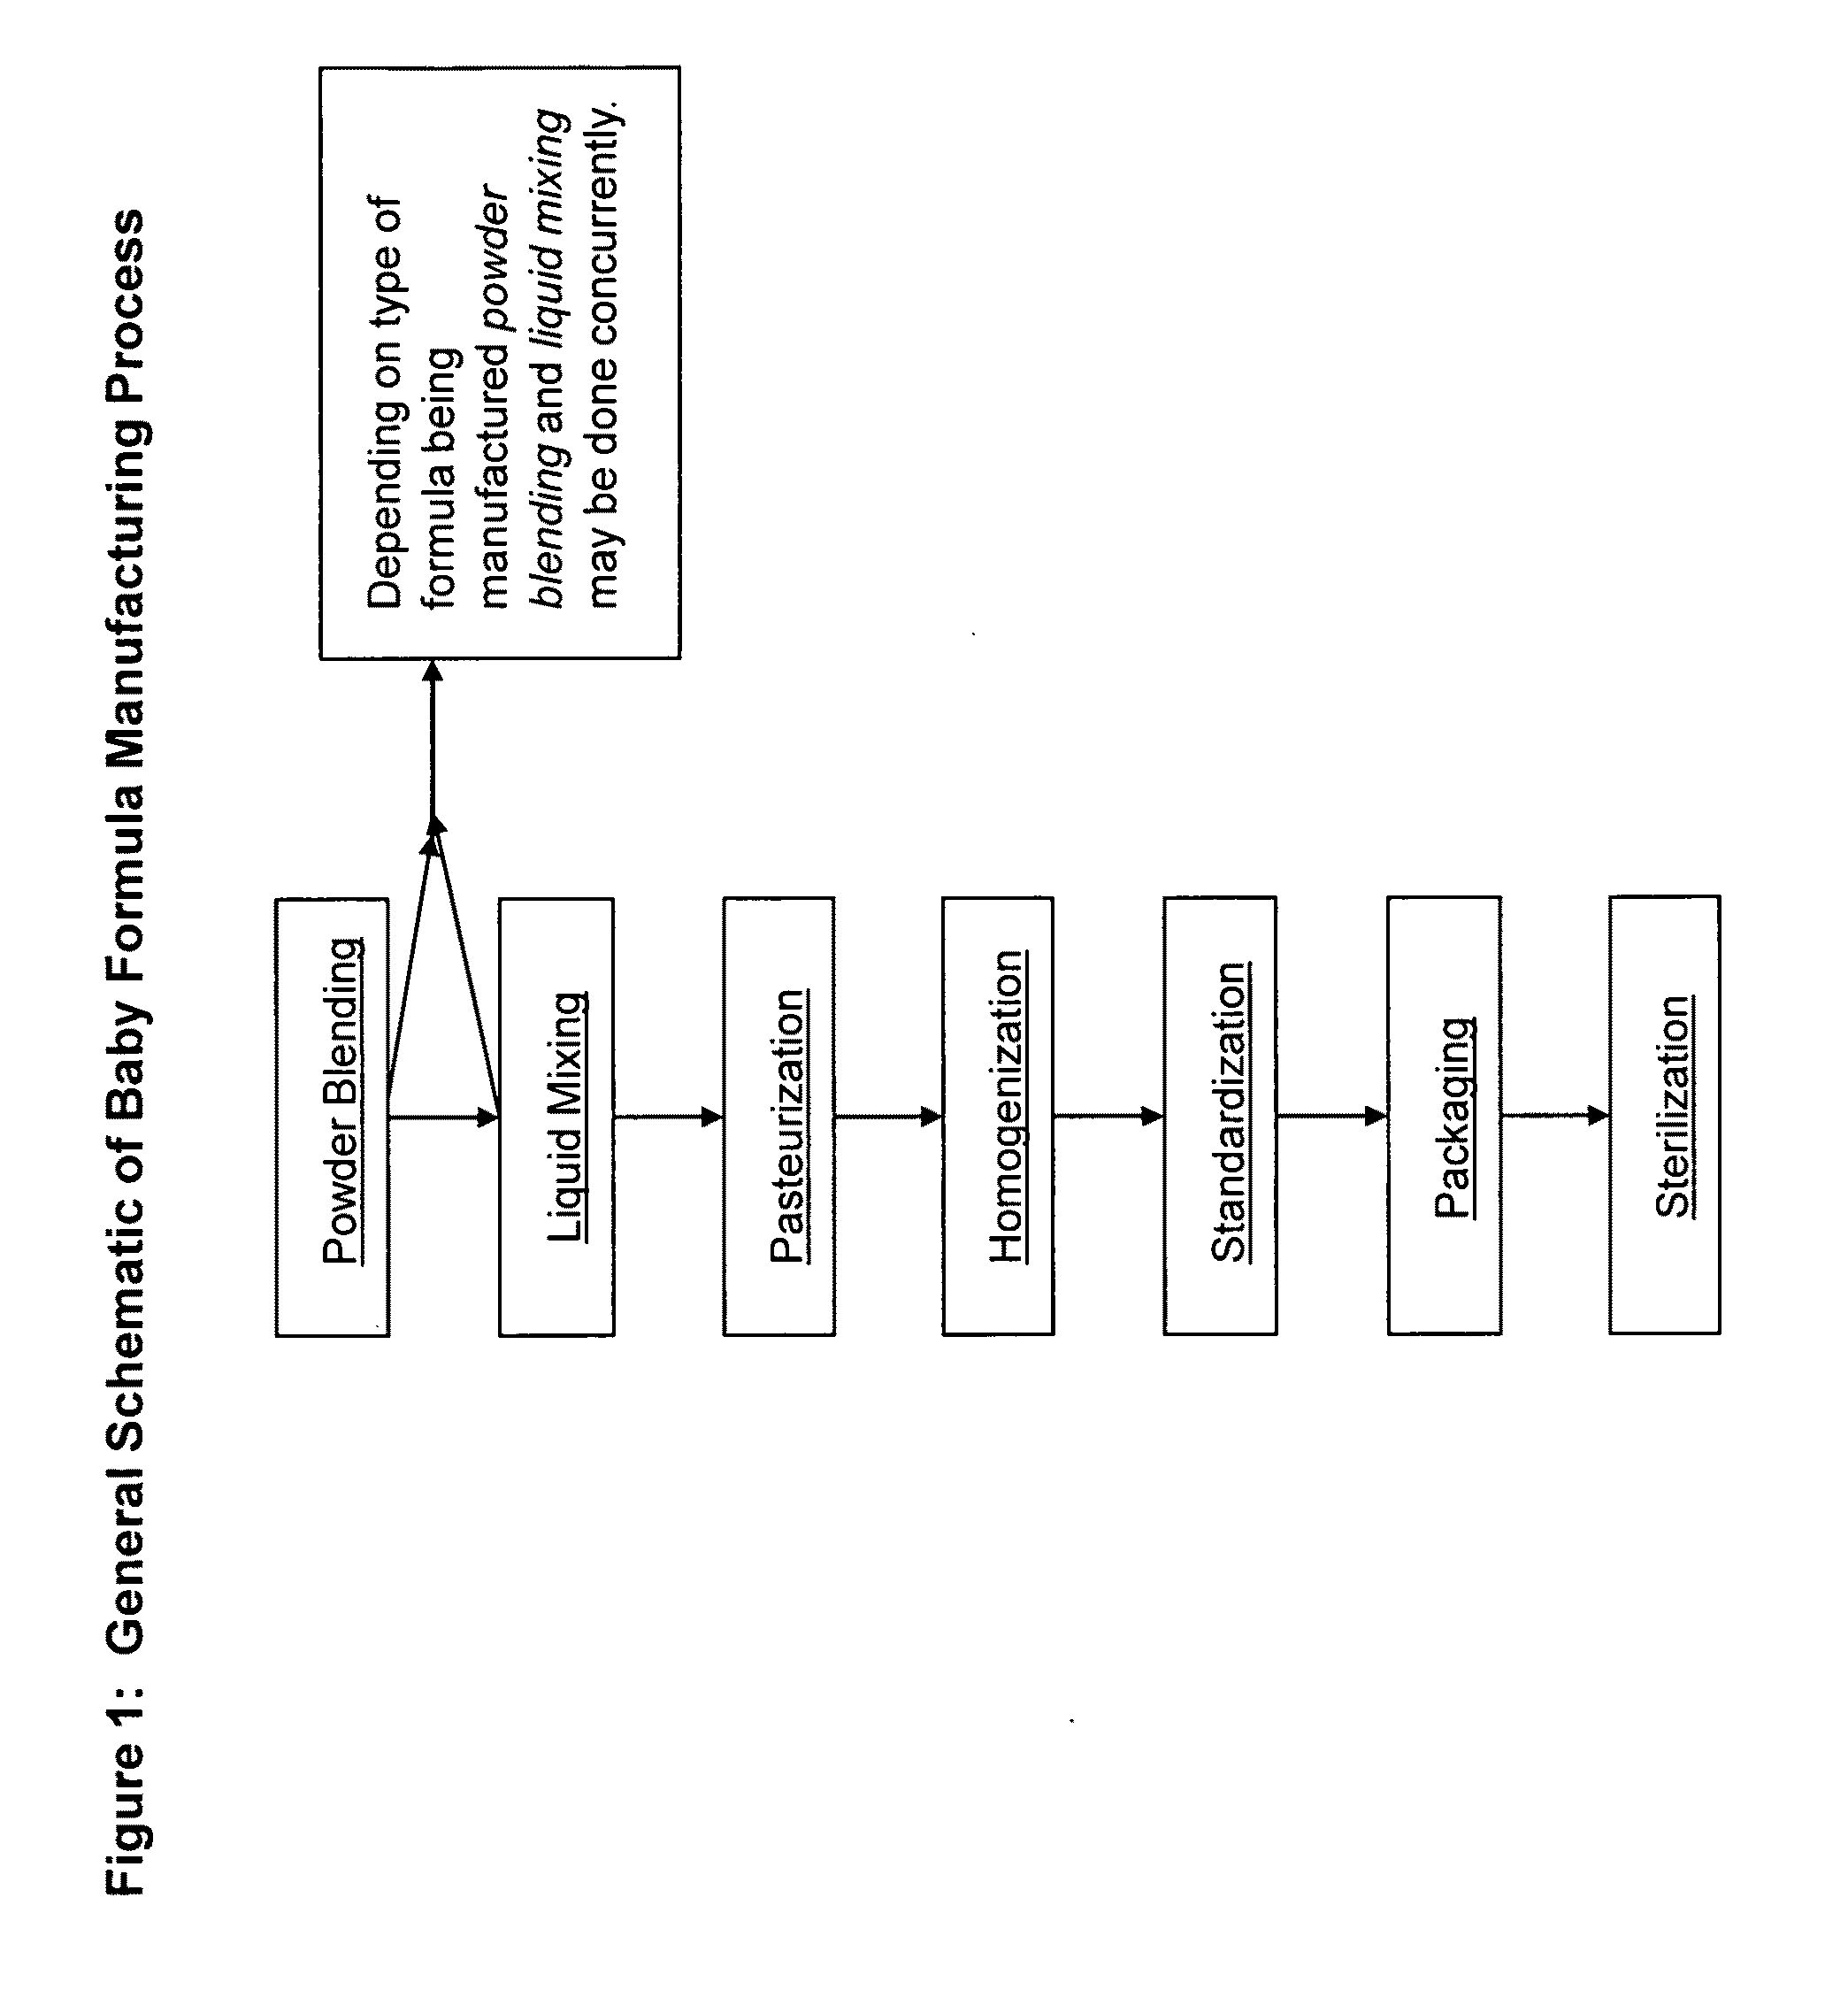 Manufacturing execution system for use in manufacturing baby formula